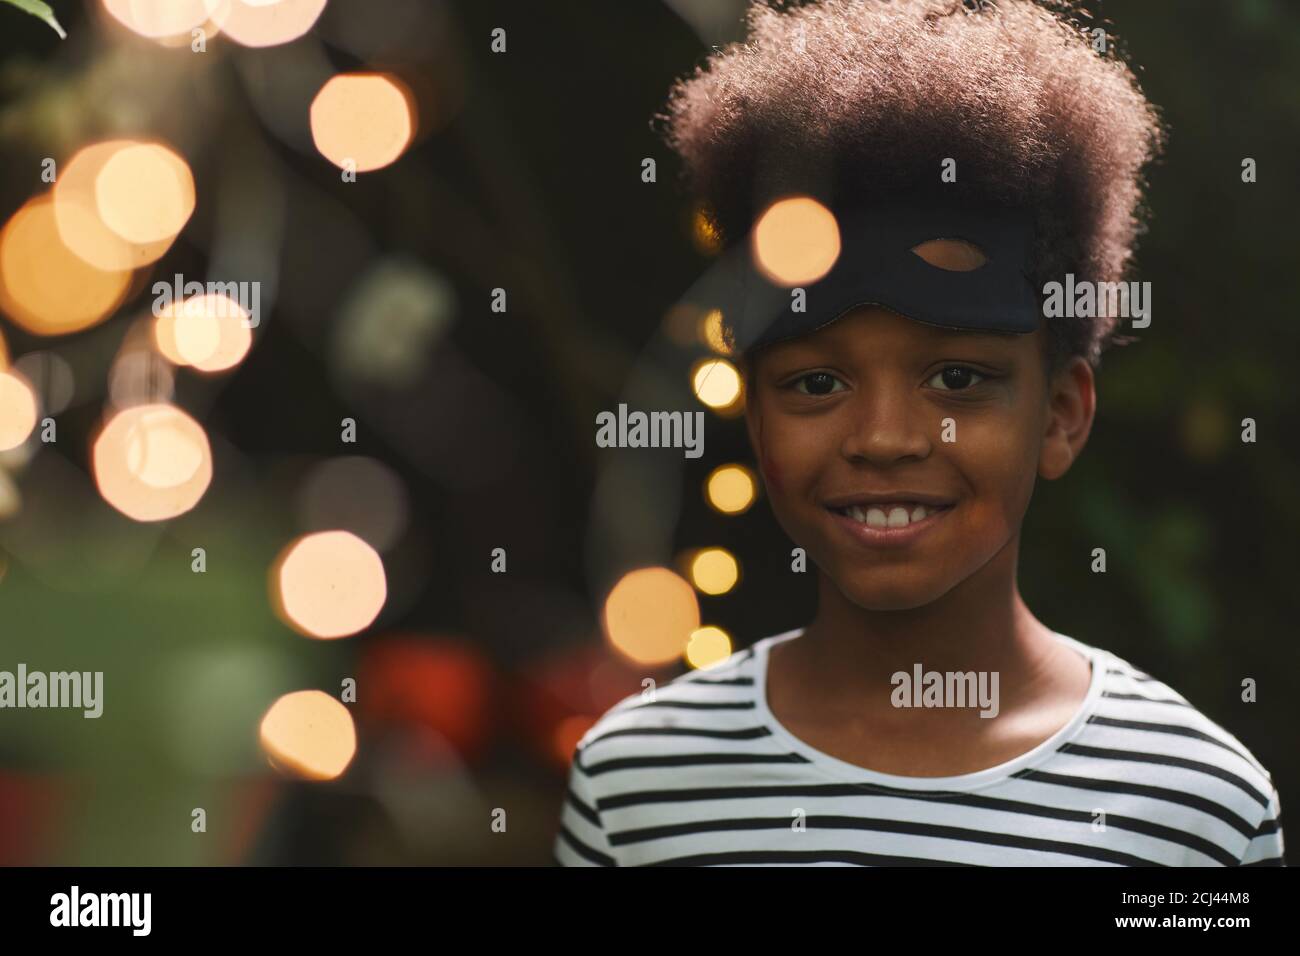 Portrait of smiling African-American boy looking at camera during outdoor Halloween party with lights , copy space Stock Photo